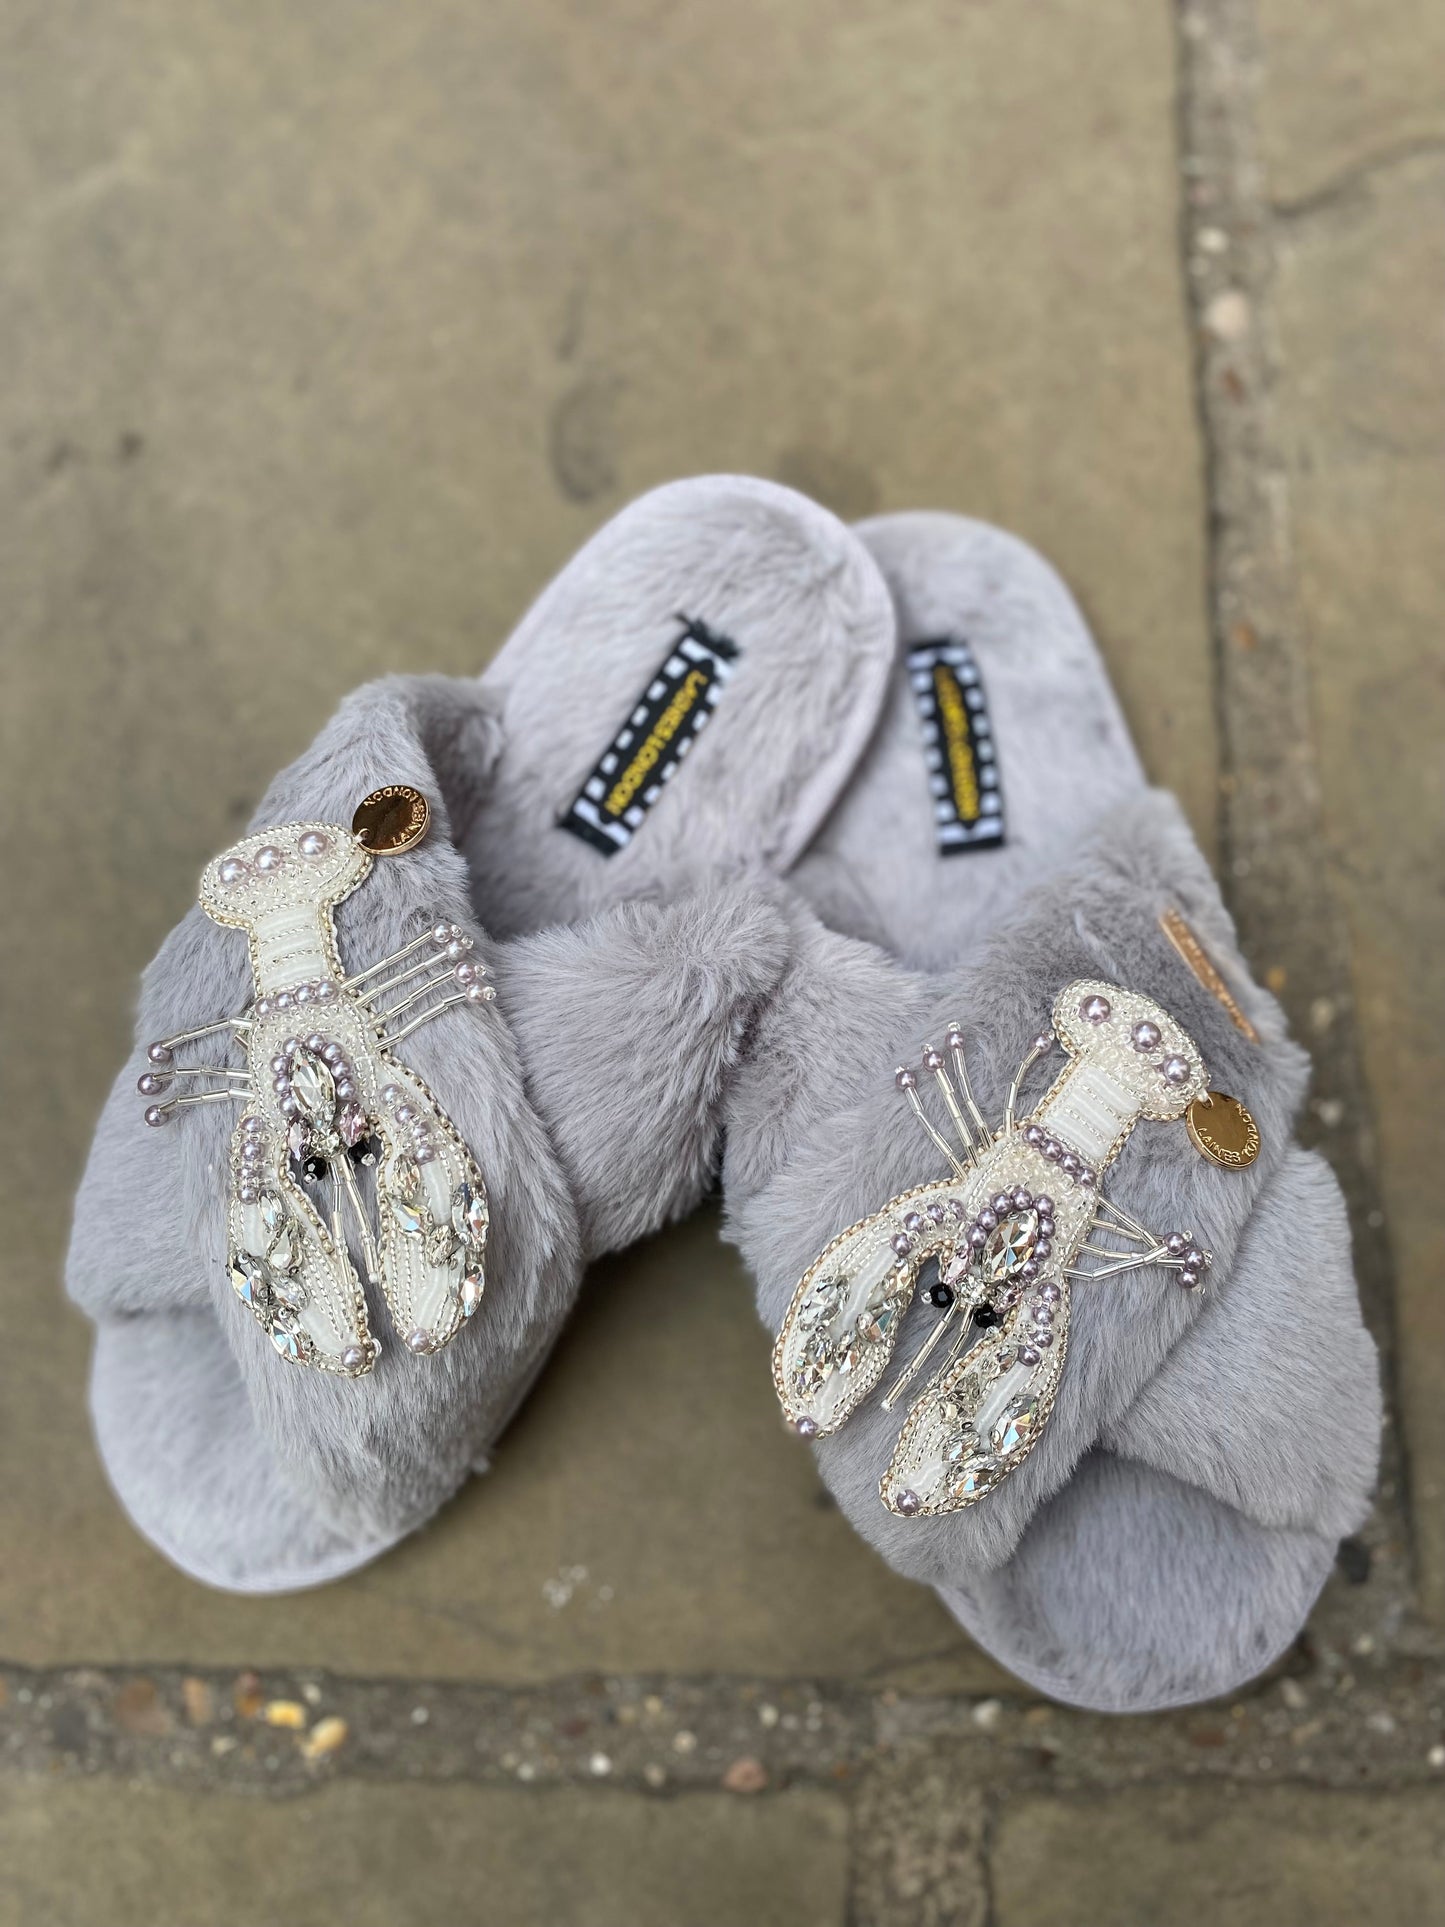 Double Silver and Pearl Lobsters on Classic Grey Slippers